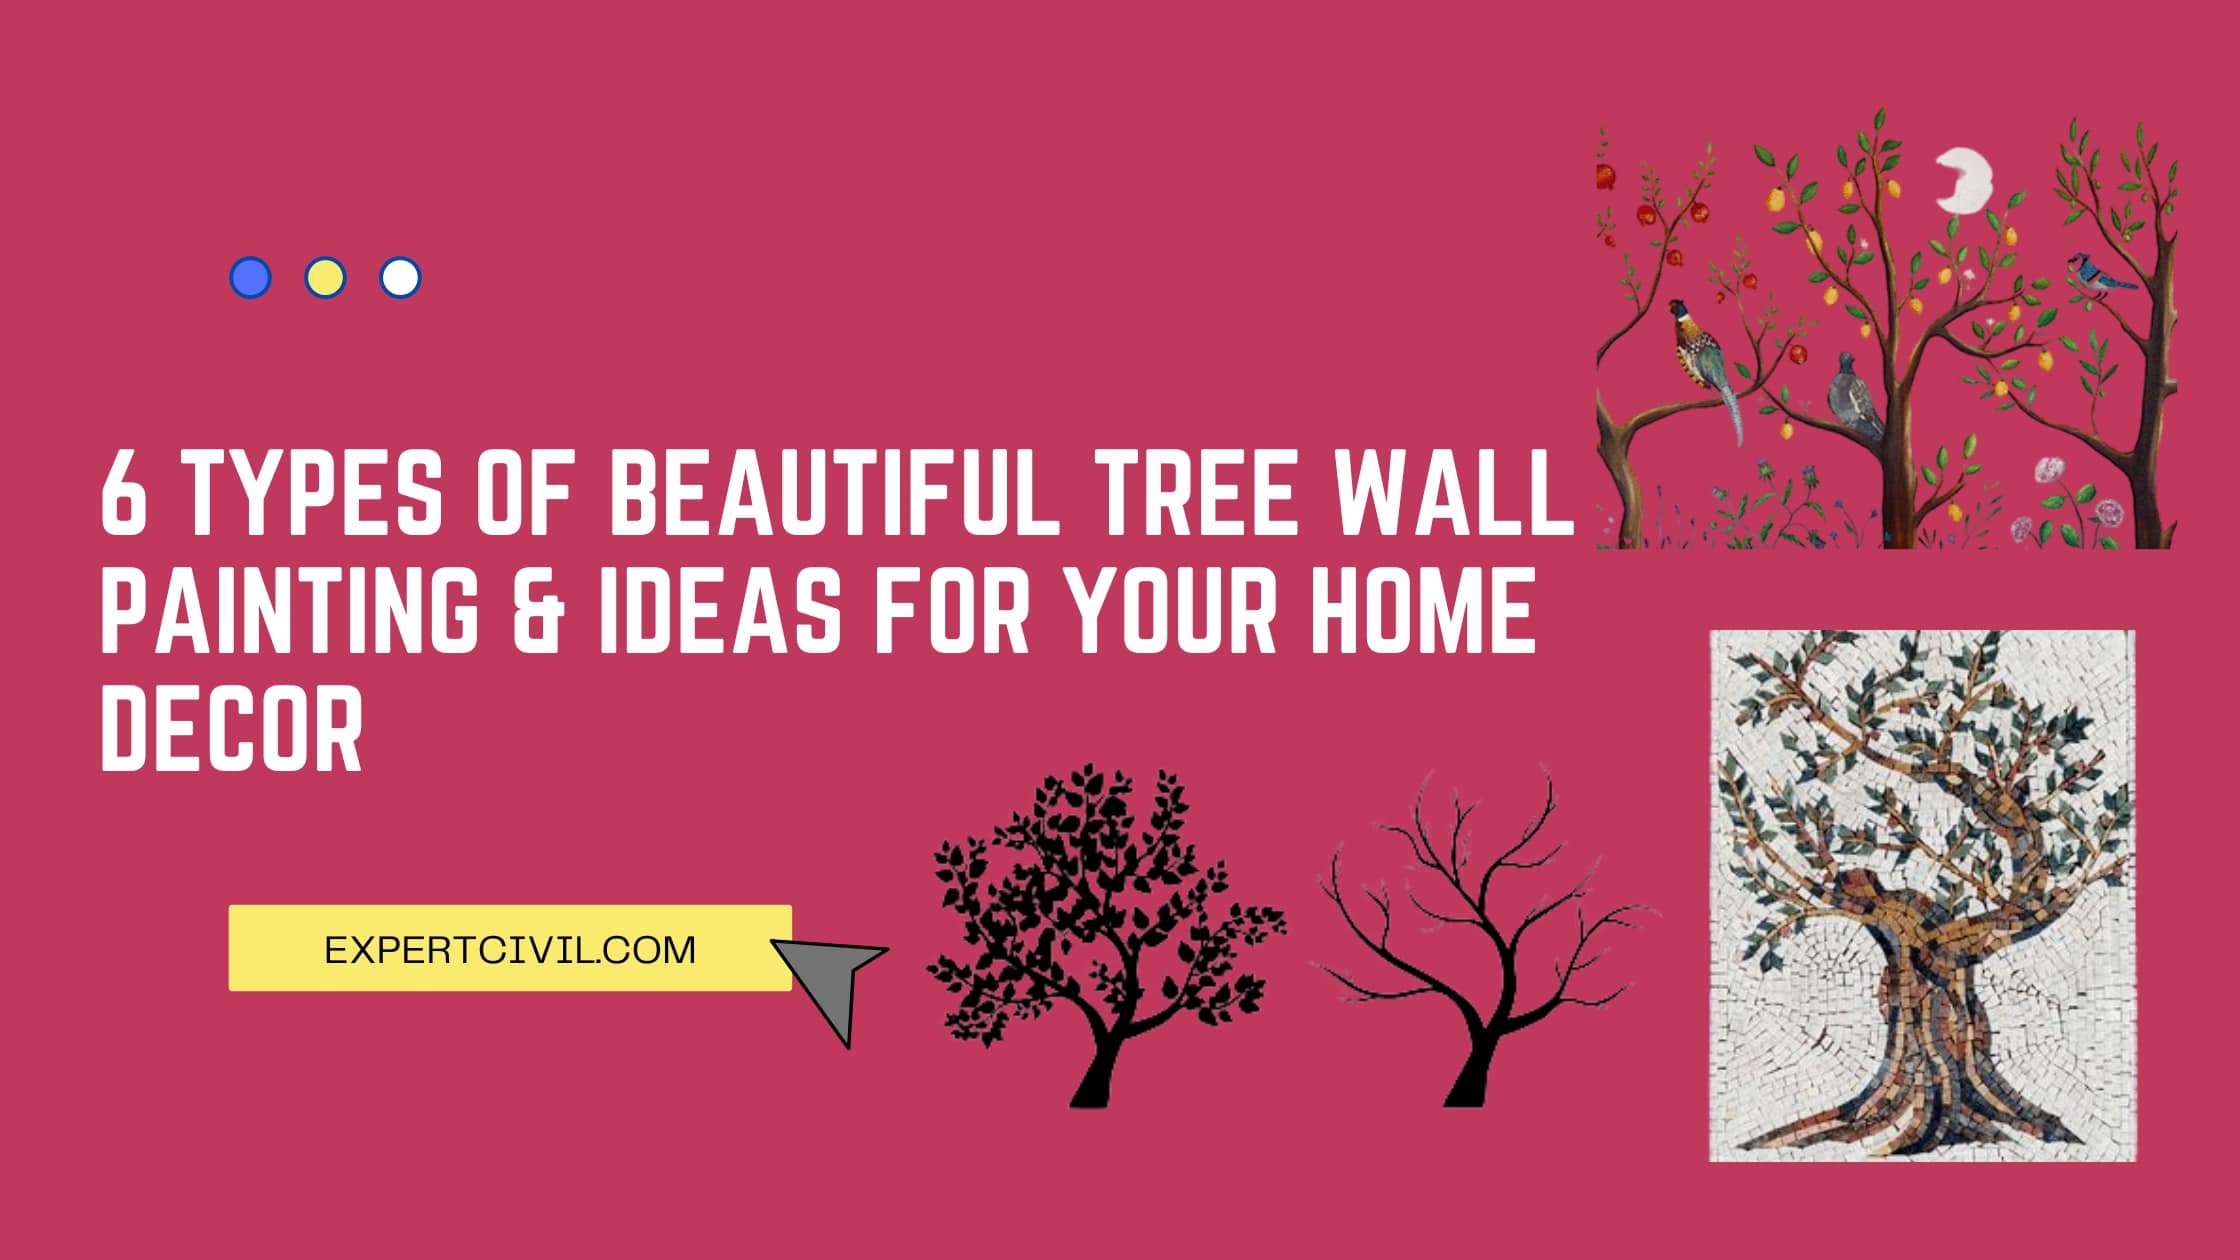 6 Types of Beautiful Tree Wall Painting & Ideas For Your Home Decor